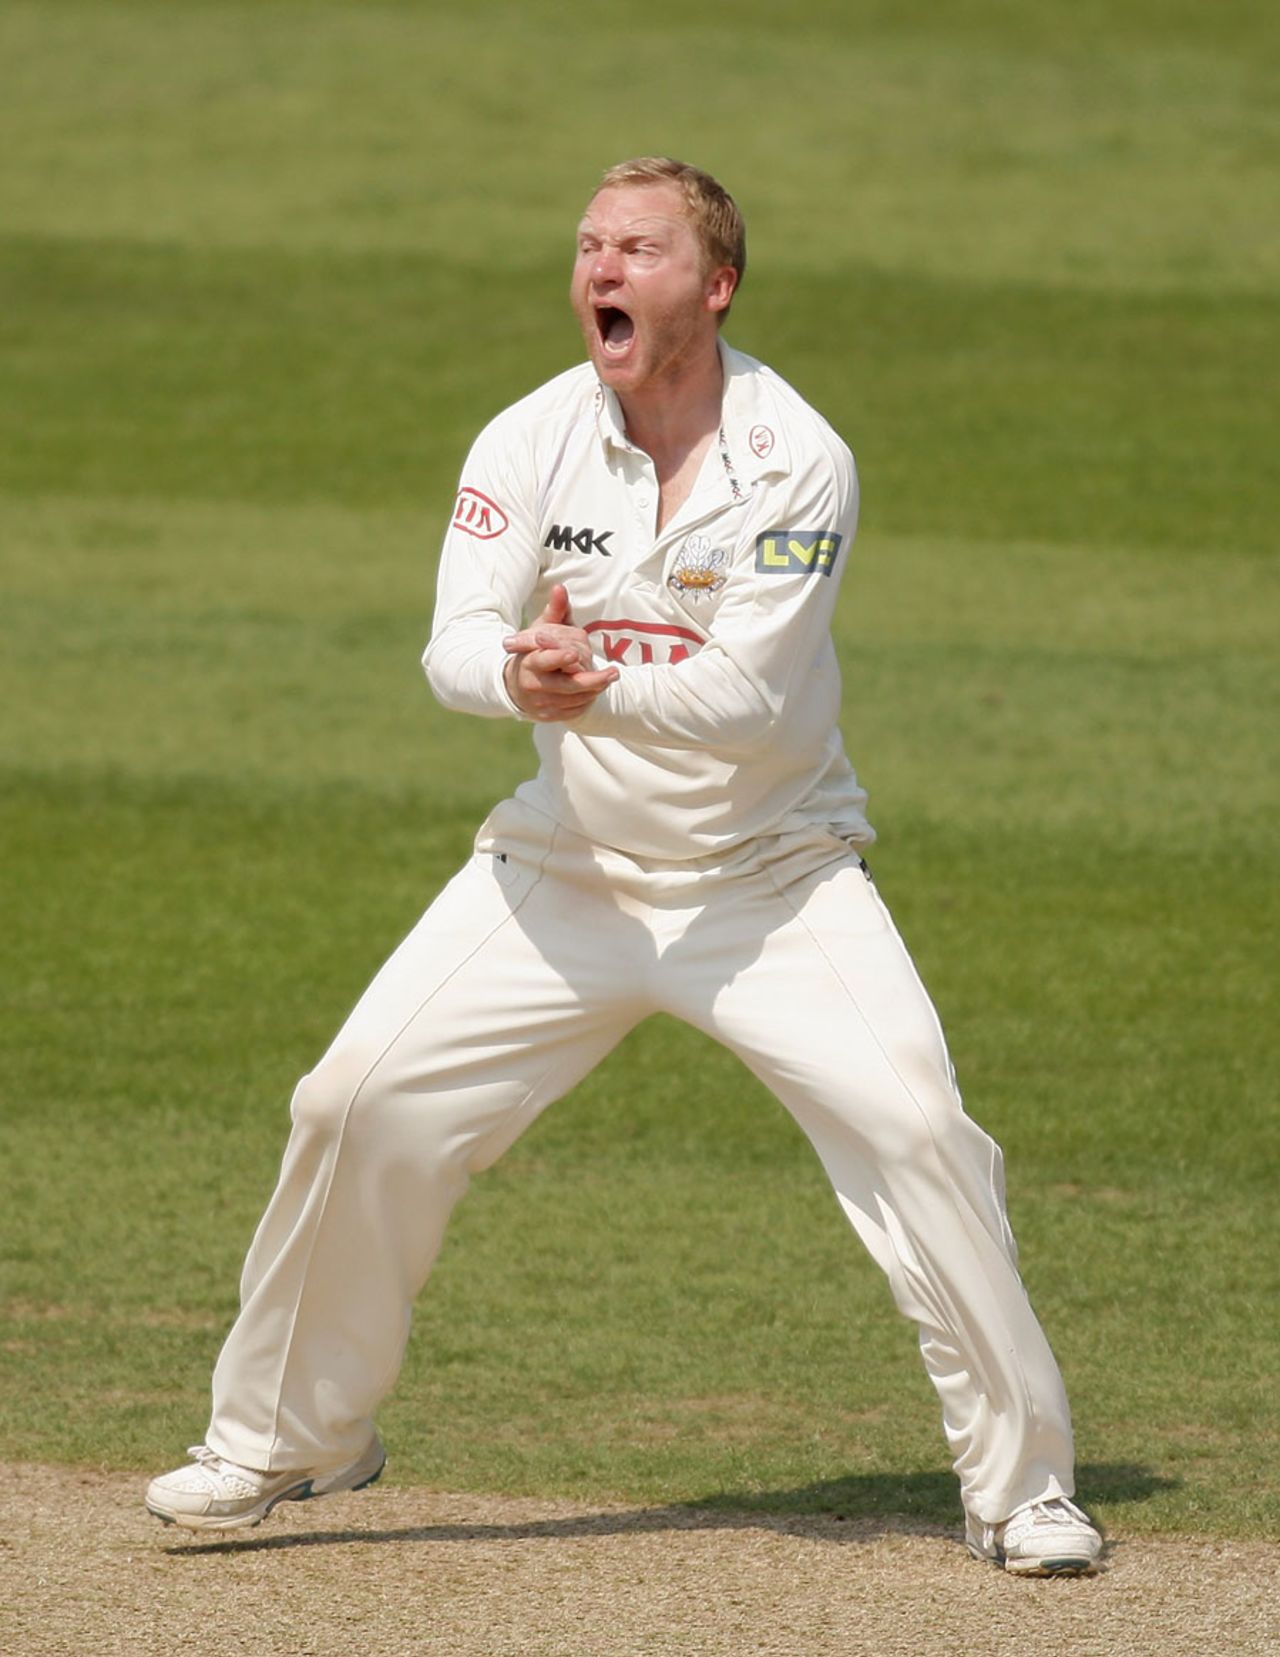 Gareth Batty took six wickets to trouble Warwickshire, Surrey v Warwickshire, County Championship, Division One, The Oval, May 24, 2012